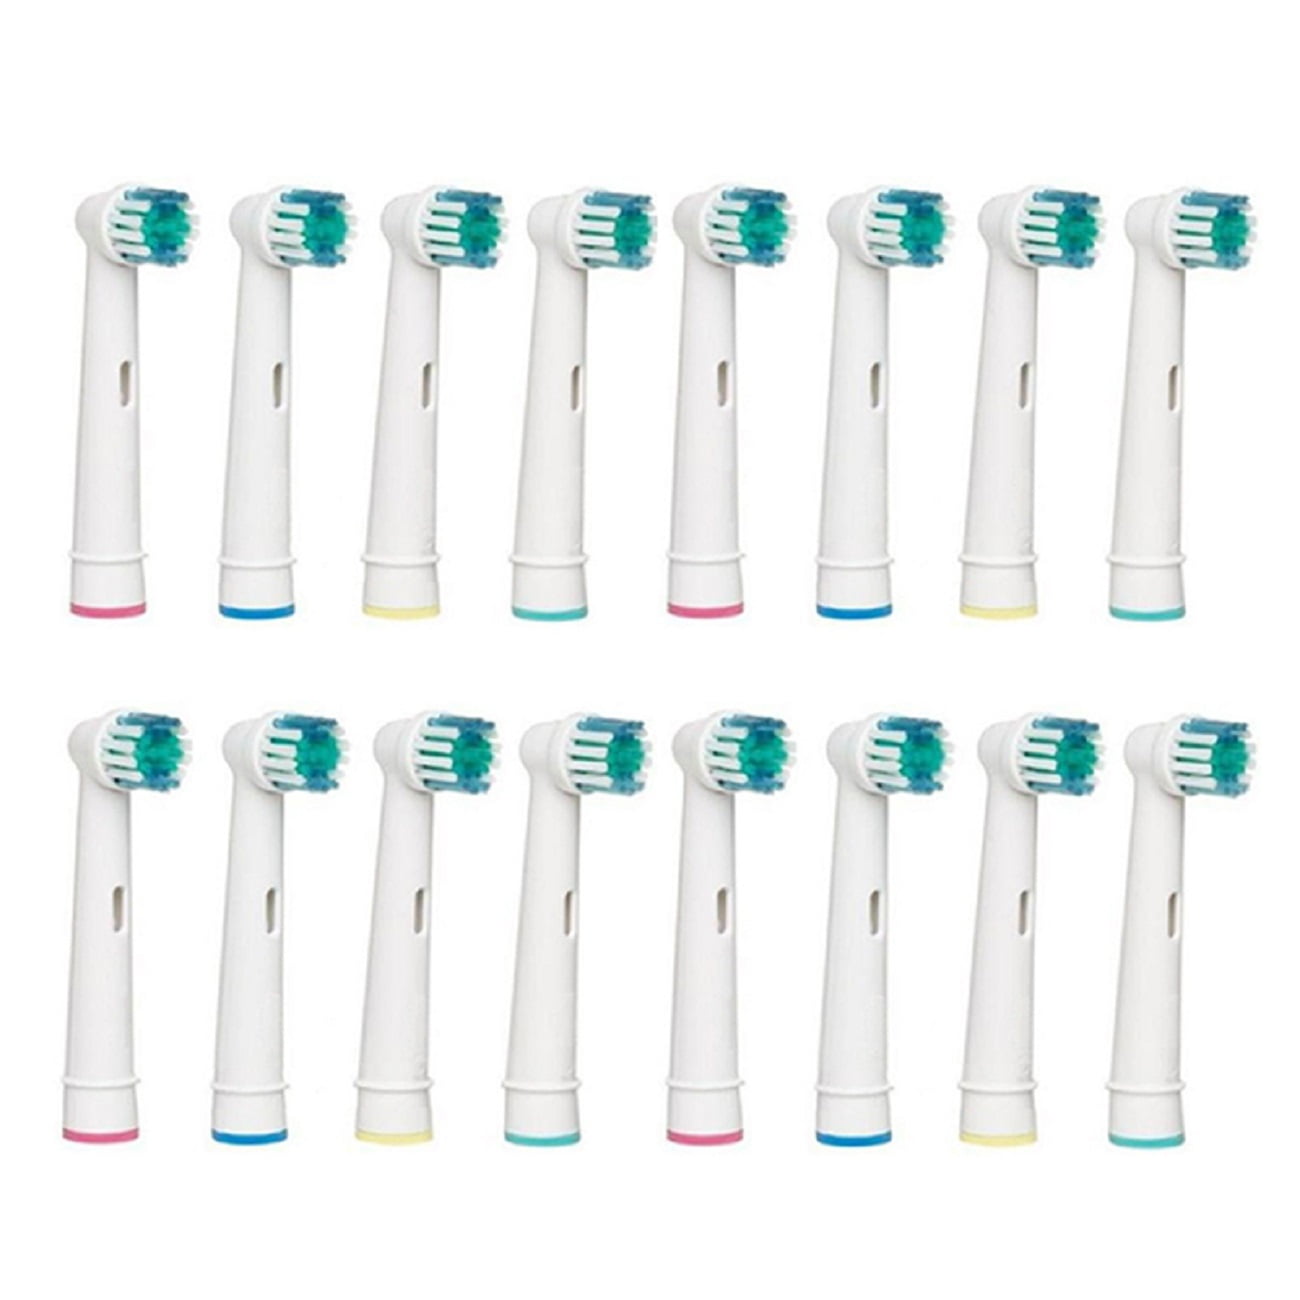 Oral b genericcompatible replacement toothbrush heads - 16 pack